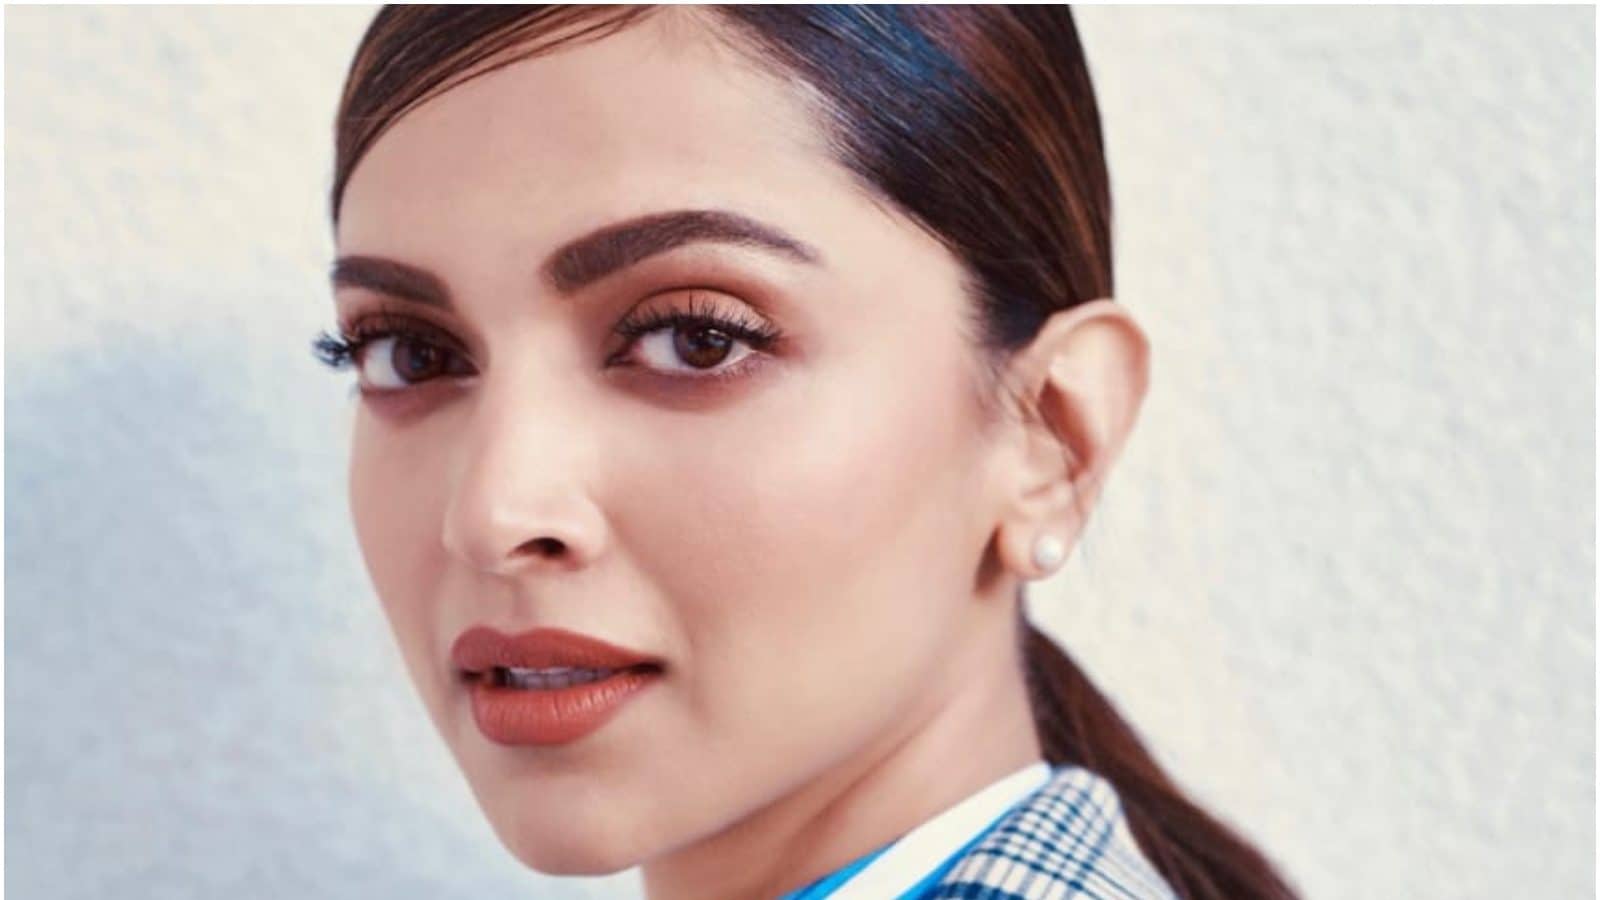 Deepika Padukone Dons Louis Vuitton to Unveil Trophy at World Cup